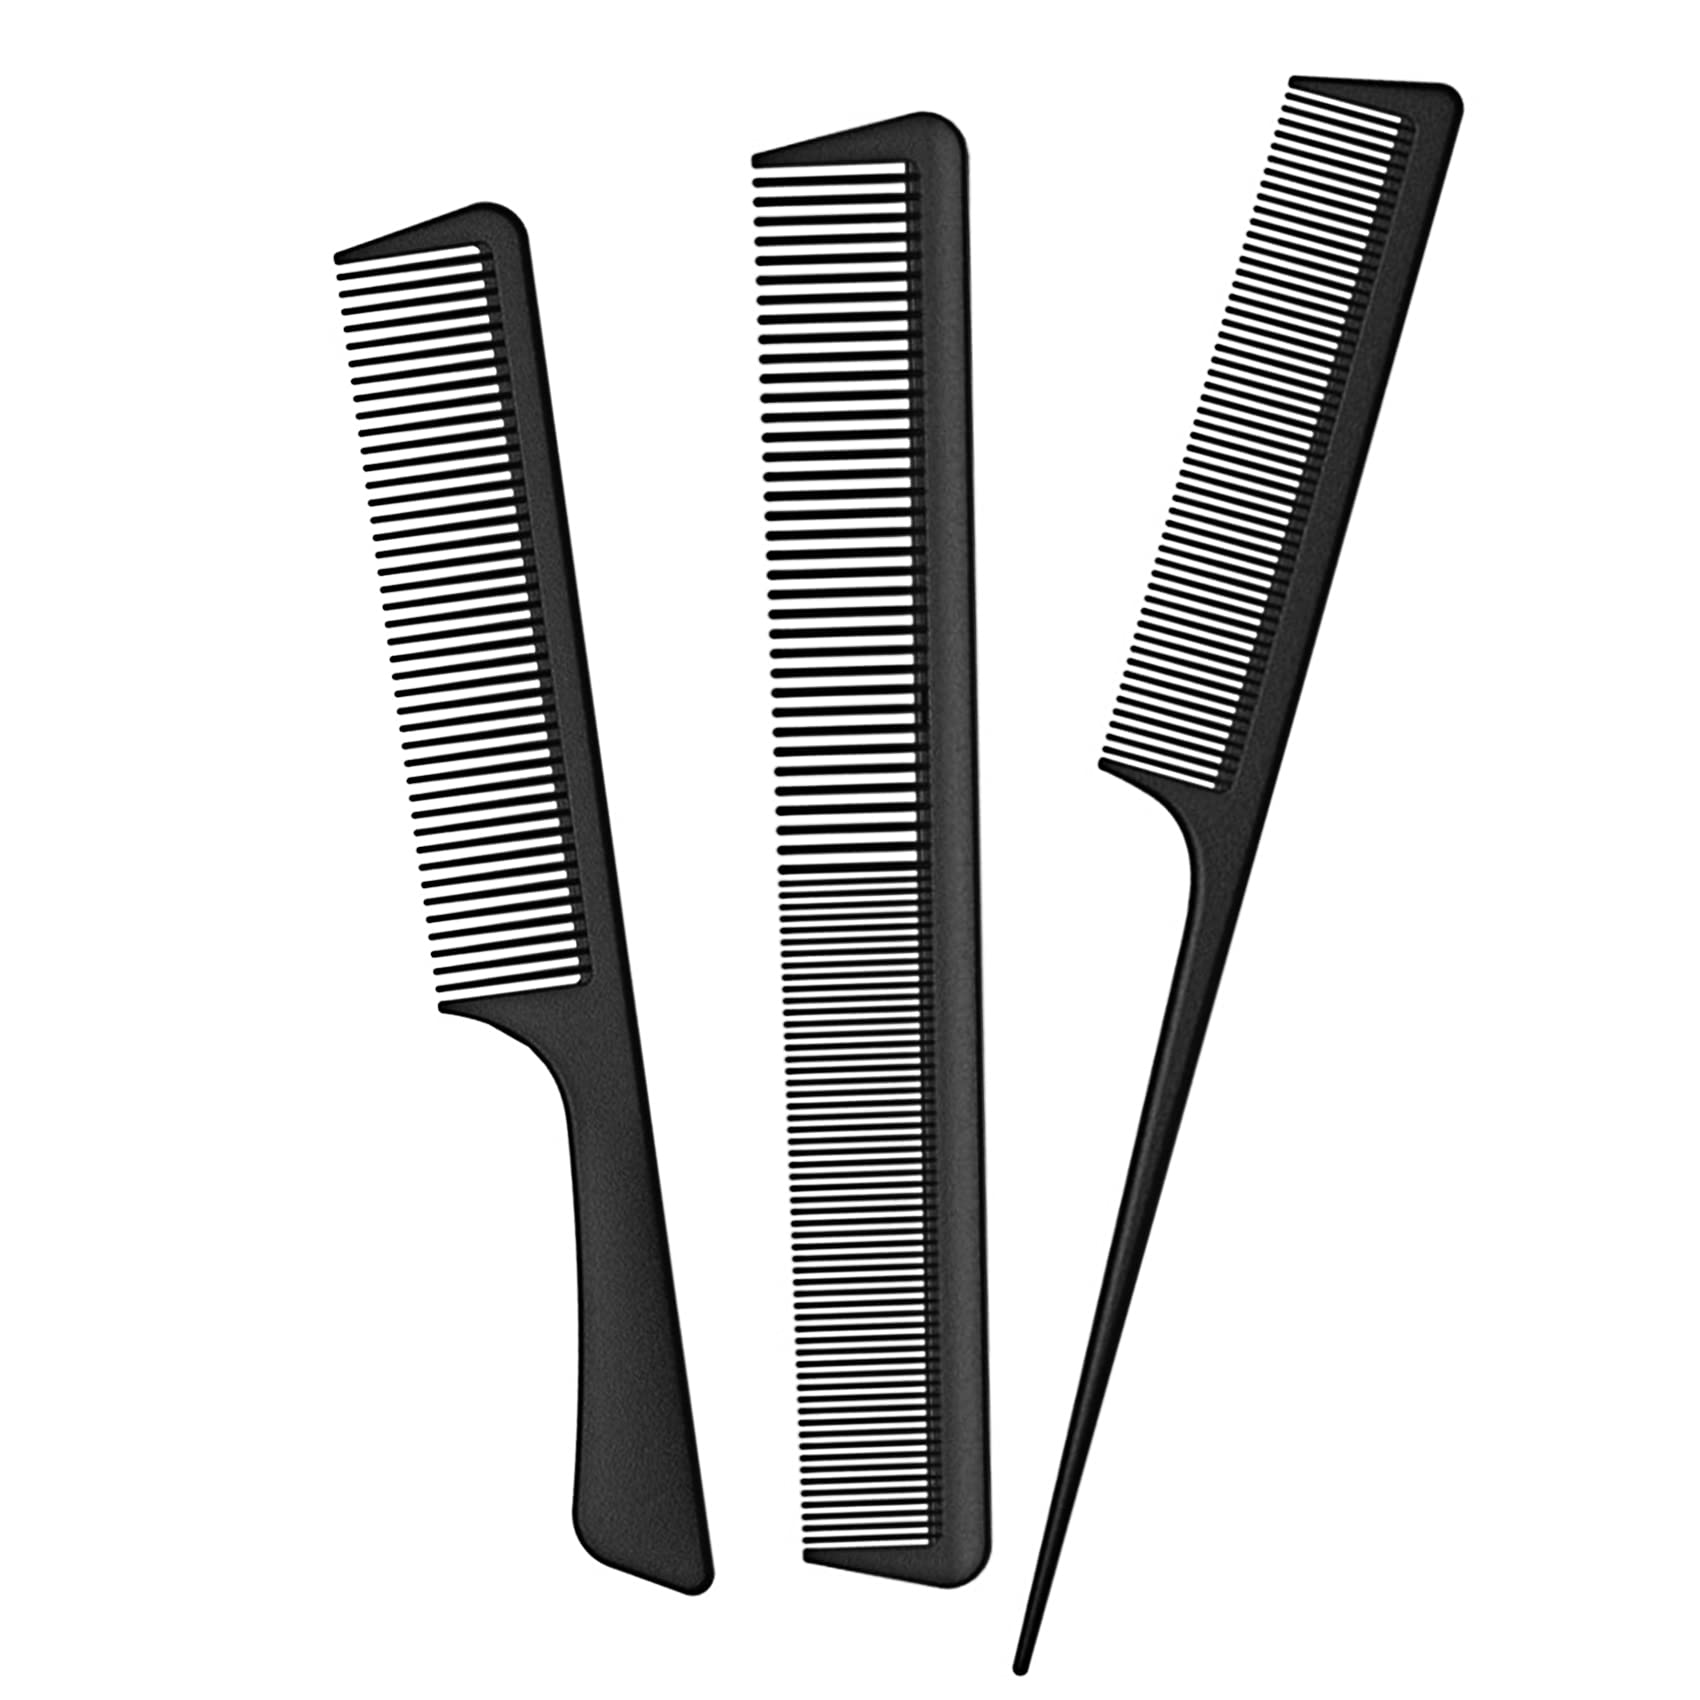 JeoPoom Hair Comb Set[3 Pieces], Tail Comb, Wide Tooth Comb and Fine Wide Tooth Comb, Carbon Fiber Professional Haircut Comb, Sturdy, Heat-resistant, Anti-static for Most Hair Types(Black)